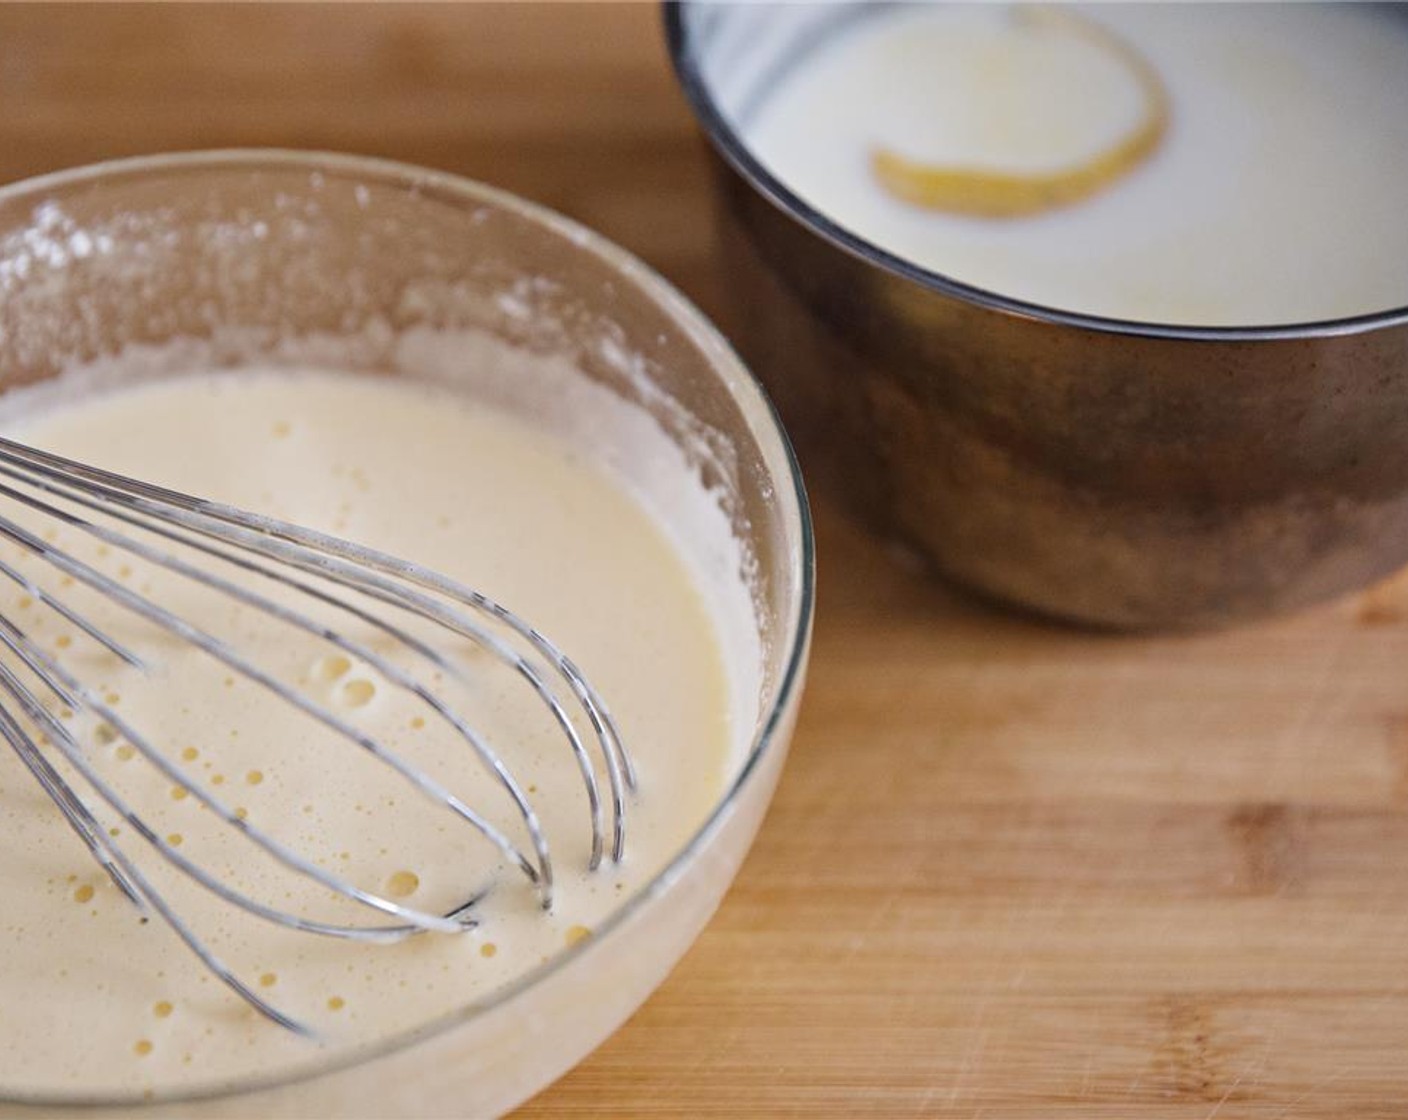 step 4 When the milk mixture has come up to a boil, remove from the heat and add a small amount to the egg and sugar mixture. Whisk well and continue adding milk to the egg mixture, until everything is combined into a thin custard.